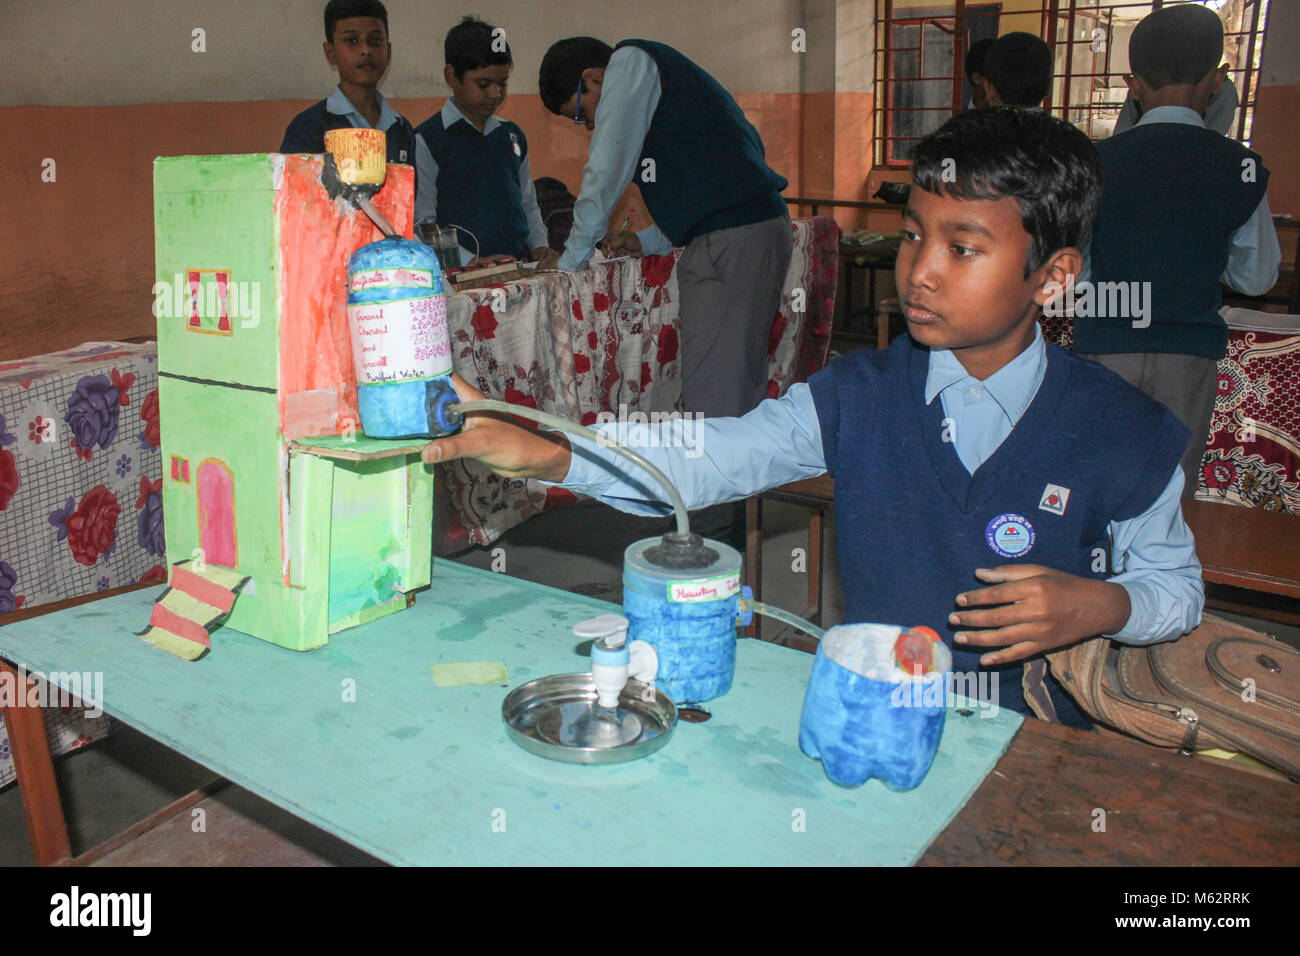 Guwahati, India. 28th Feb, 2018. Students showcased their invention model in a science exhibition during National Science Day at Assam Jatiya Vidyalaya. National Science Day is celebrated every year in India on February 28th, a date which marks the discovery of the Raman Effect by Indian physicist Sir Chandrasekhara Venkata Raman. Parents and other members of the school community who attended the fair were impressed with the presentations made by our young scientists. Credit: David Talukdar/Pacific Press/Alamy Live News Stock Photo